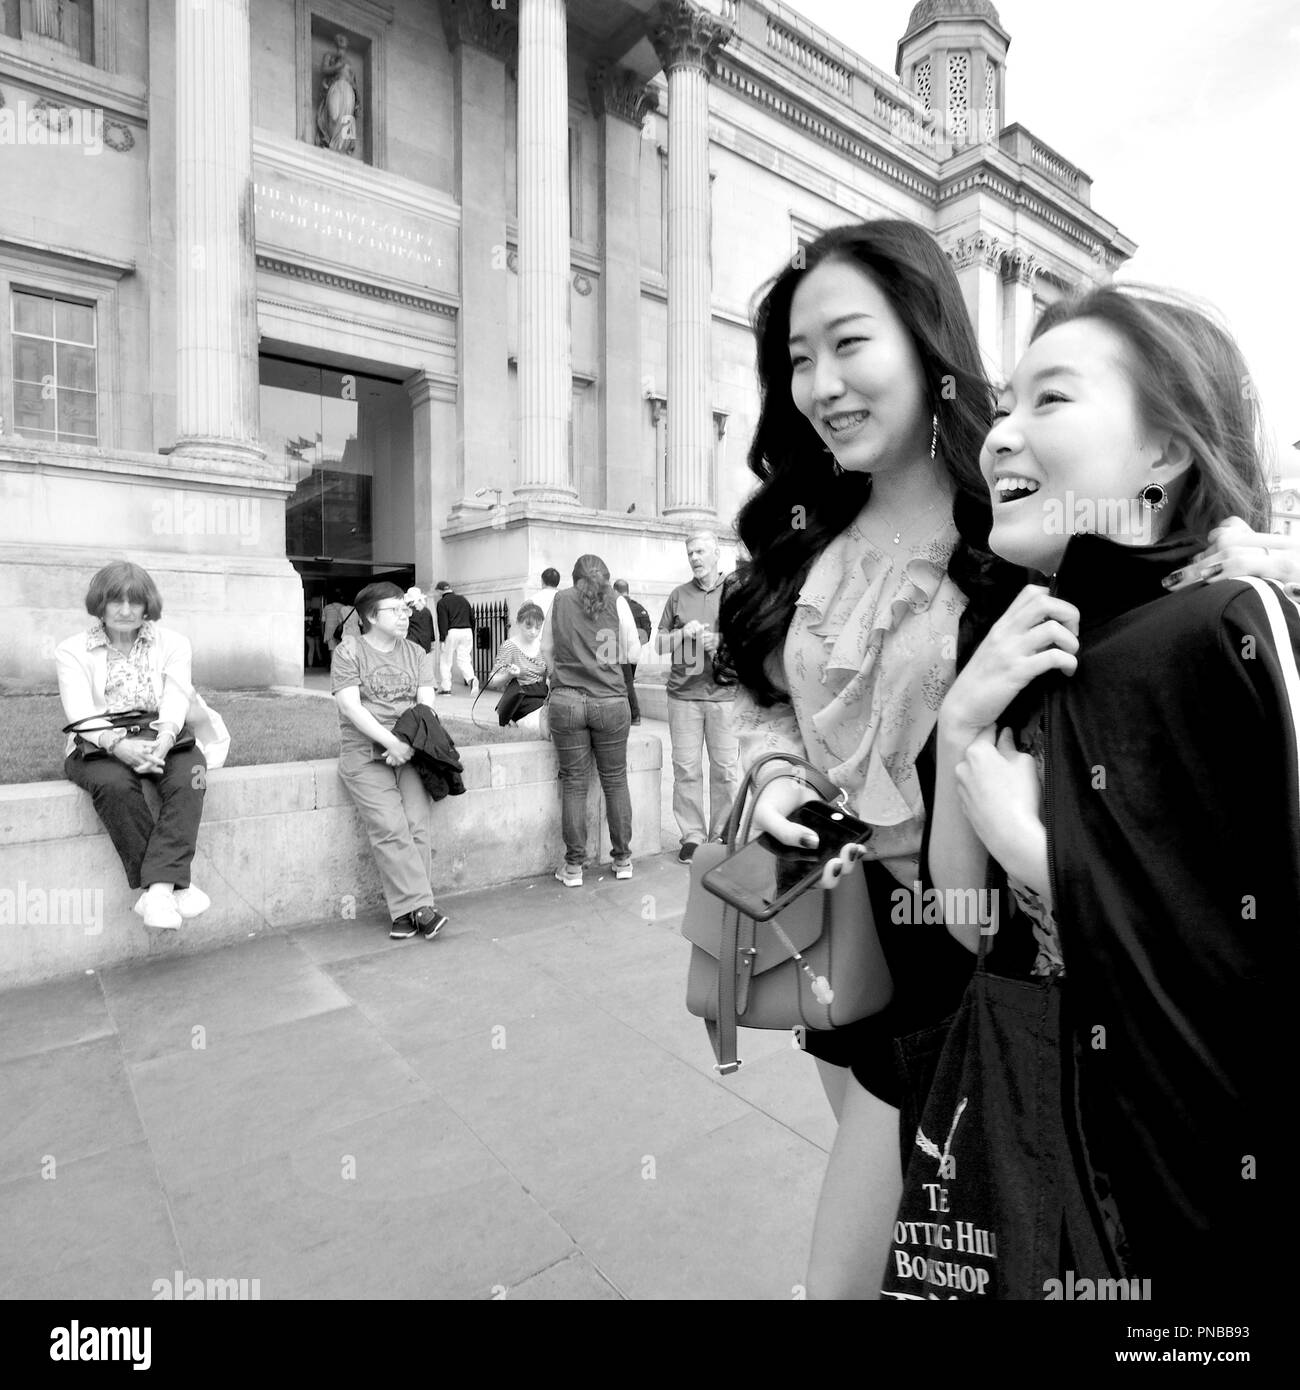 Two young Japanese women passing the National Gallery, Trafalgar Square, London, England, UK. St Martin in the Fields church behind Stock Photo